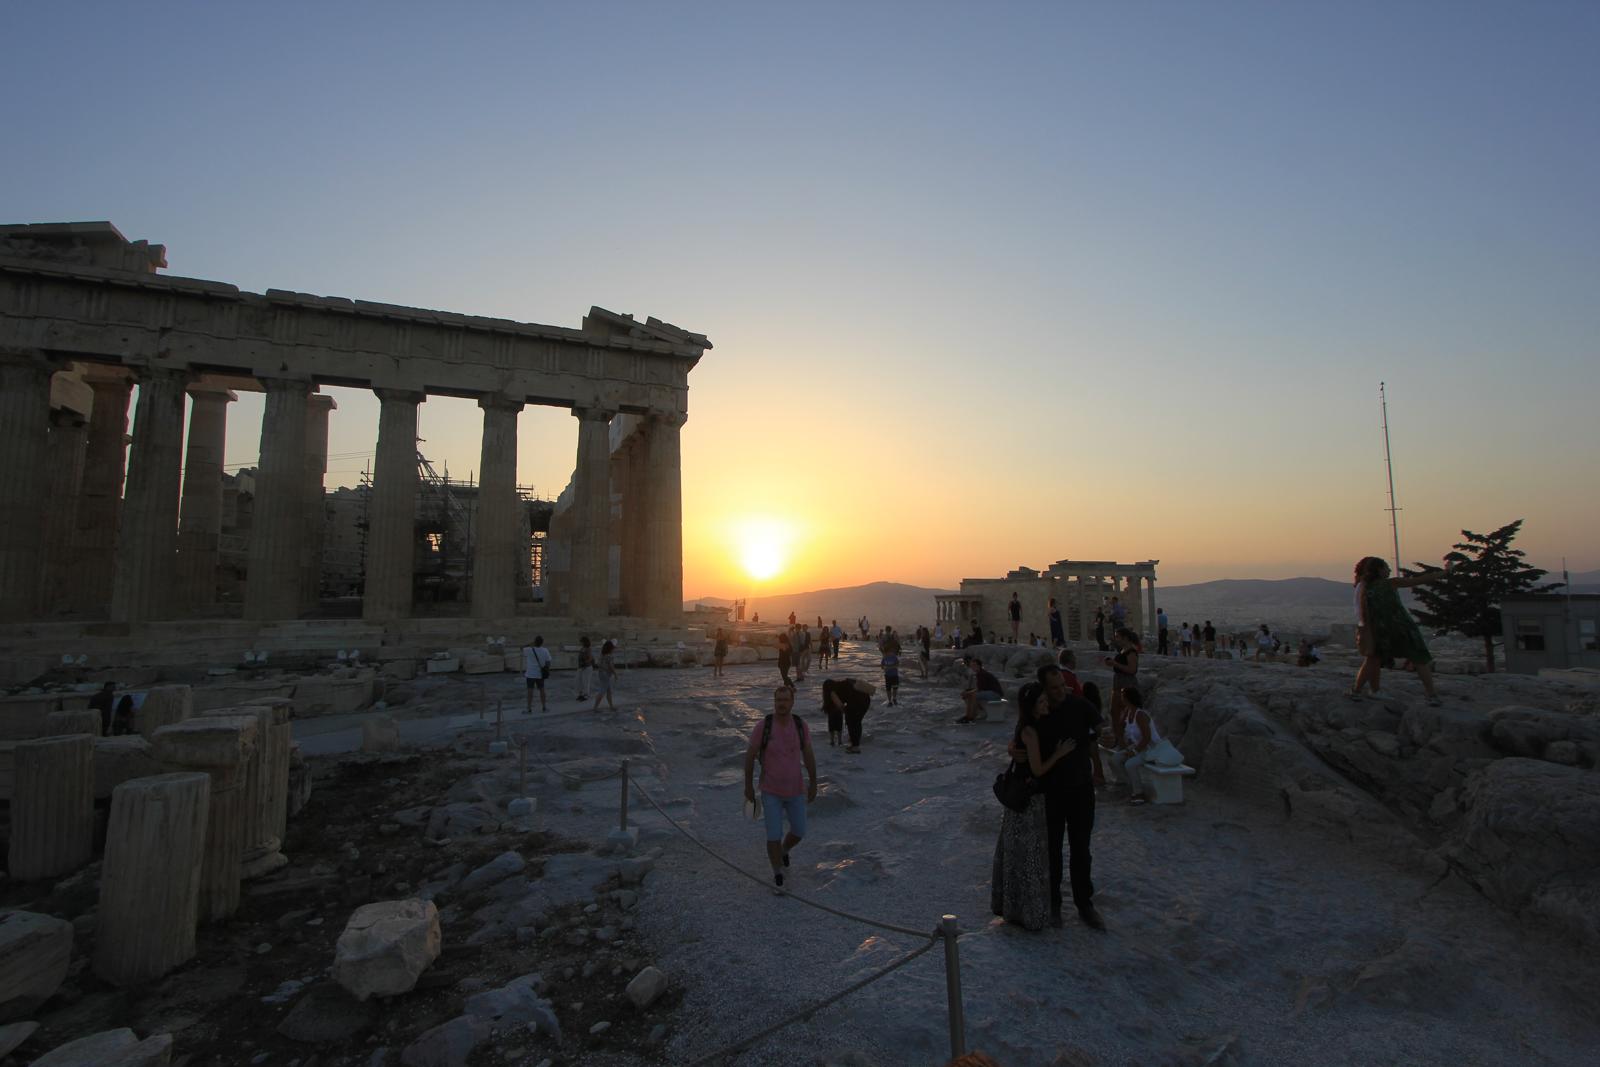 The Acropolis at sunset